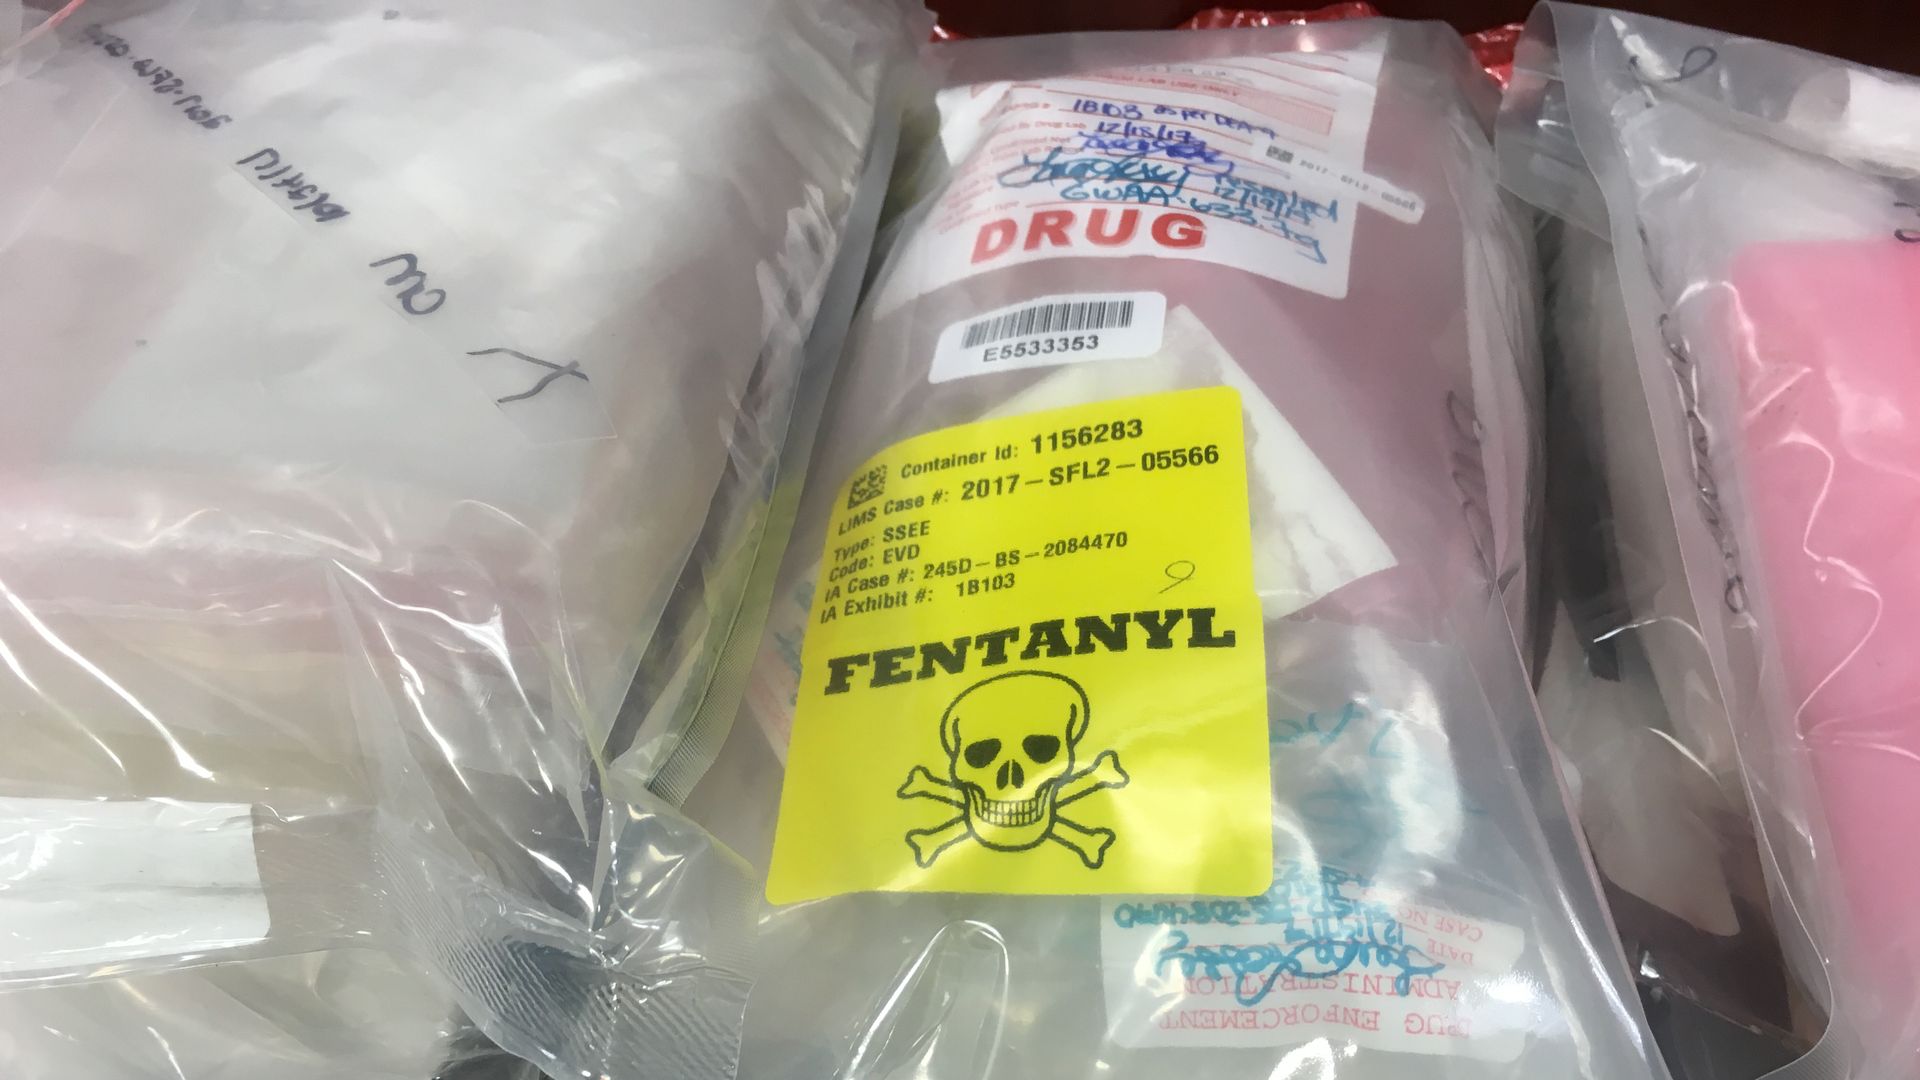 A bag from a drug bust, labeled with an image of a skull and the word "fentanyl."